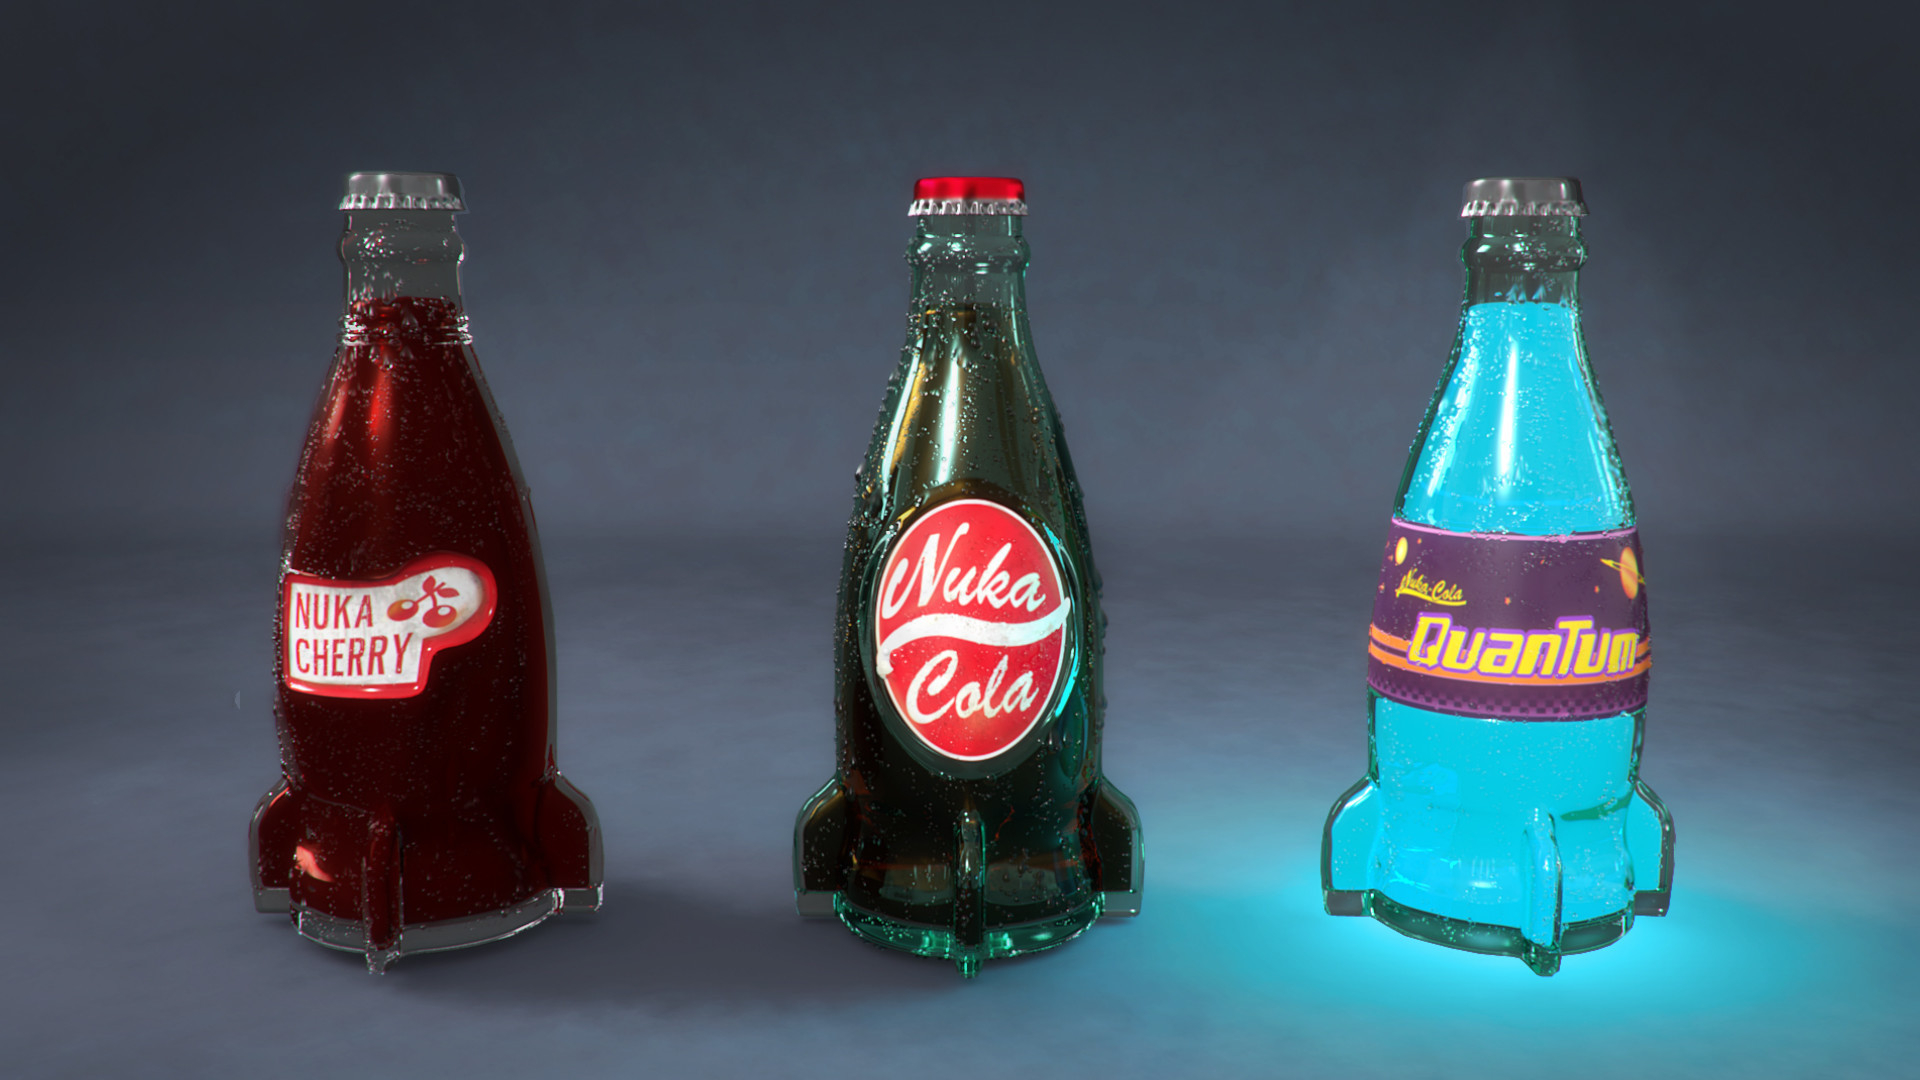 1920x1080 Nuka Cola Wallpaper Hd posted by Ethan Thomps